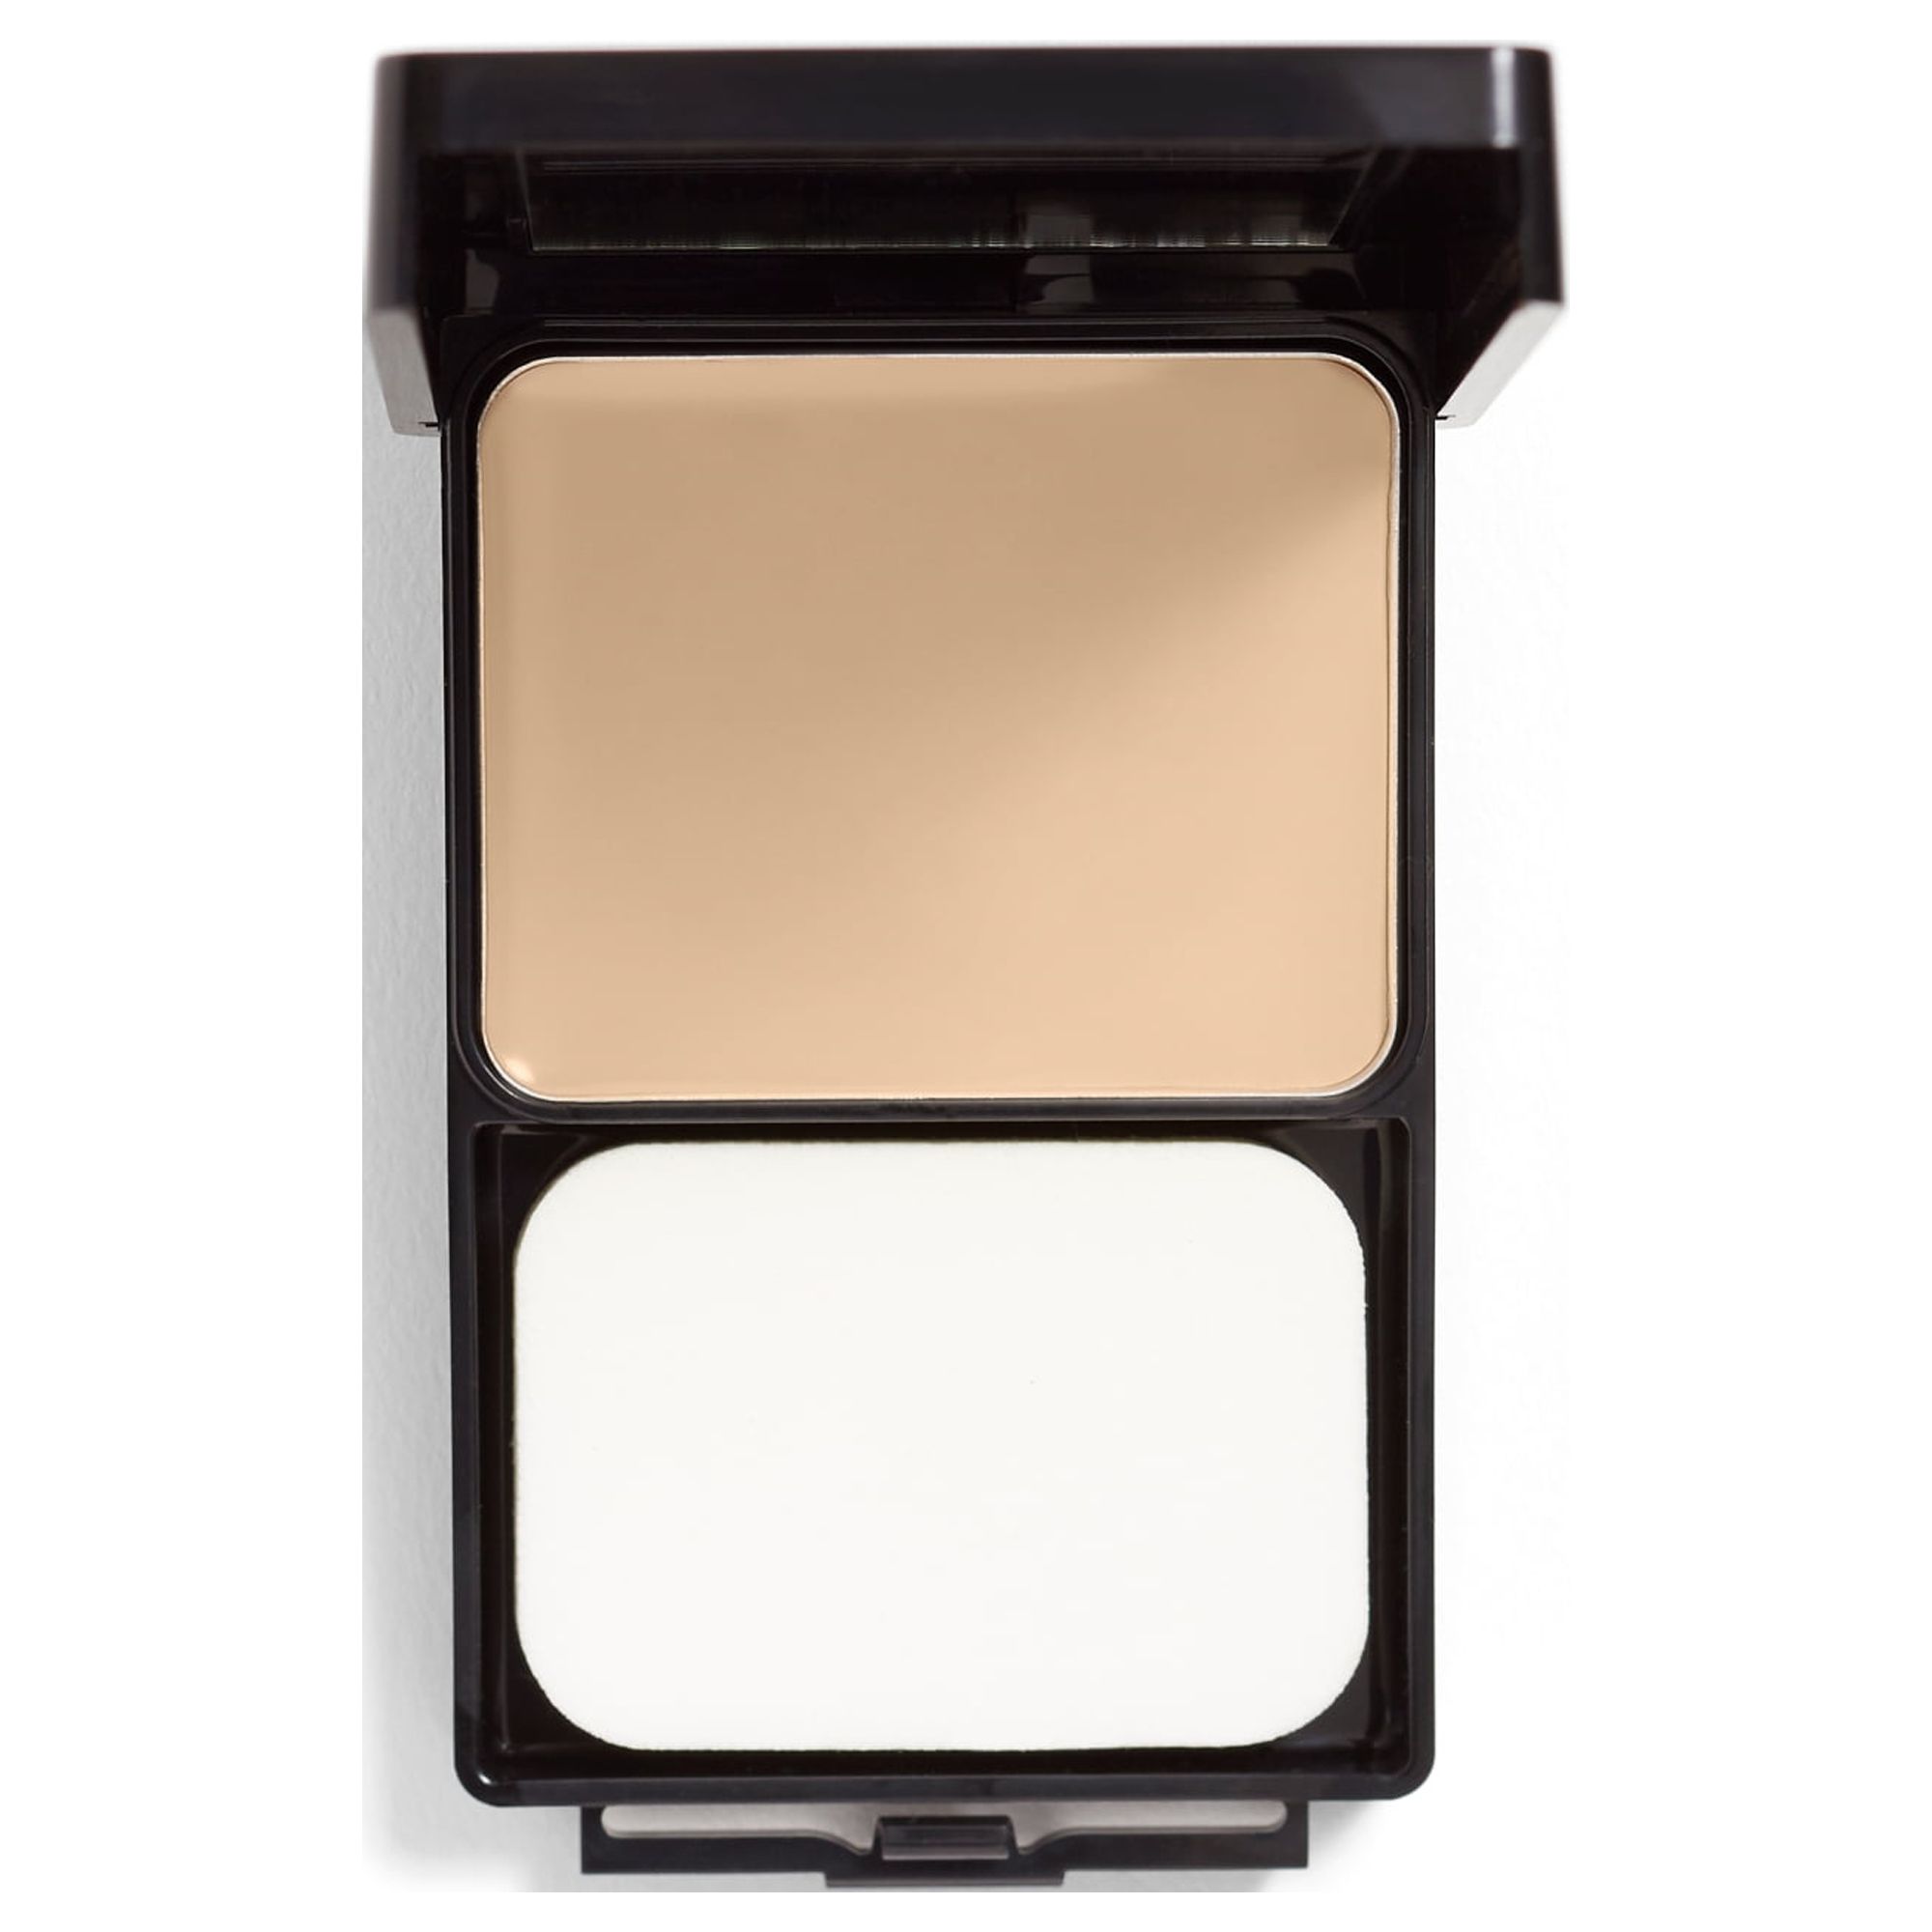 COVERGIRL Outlast All-Day Ultimate Finish 3-in-1 Foundation, 425 Buff Beige, 0.4 oz, Lightweight Foundation - image 1 of 16